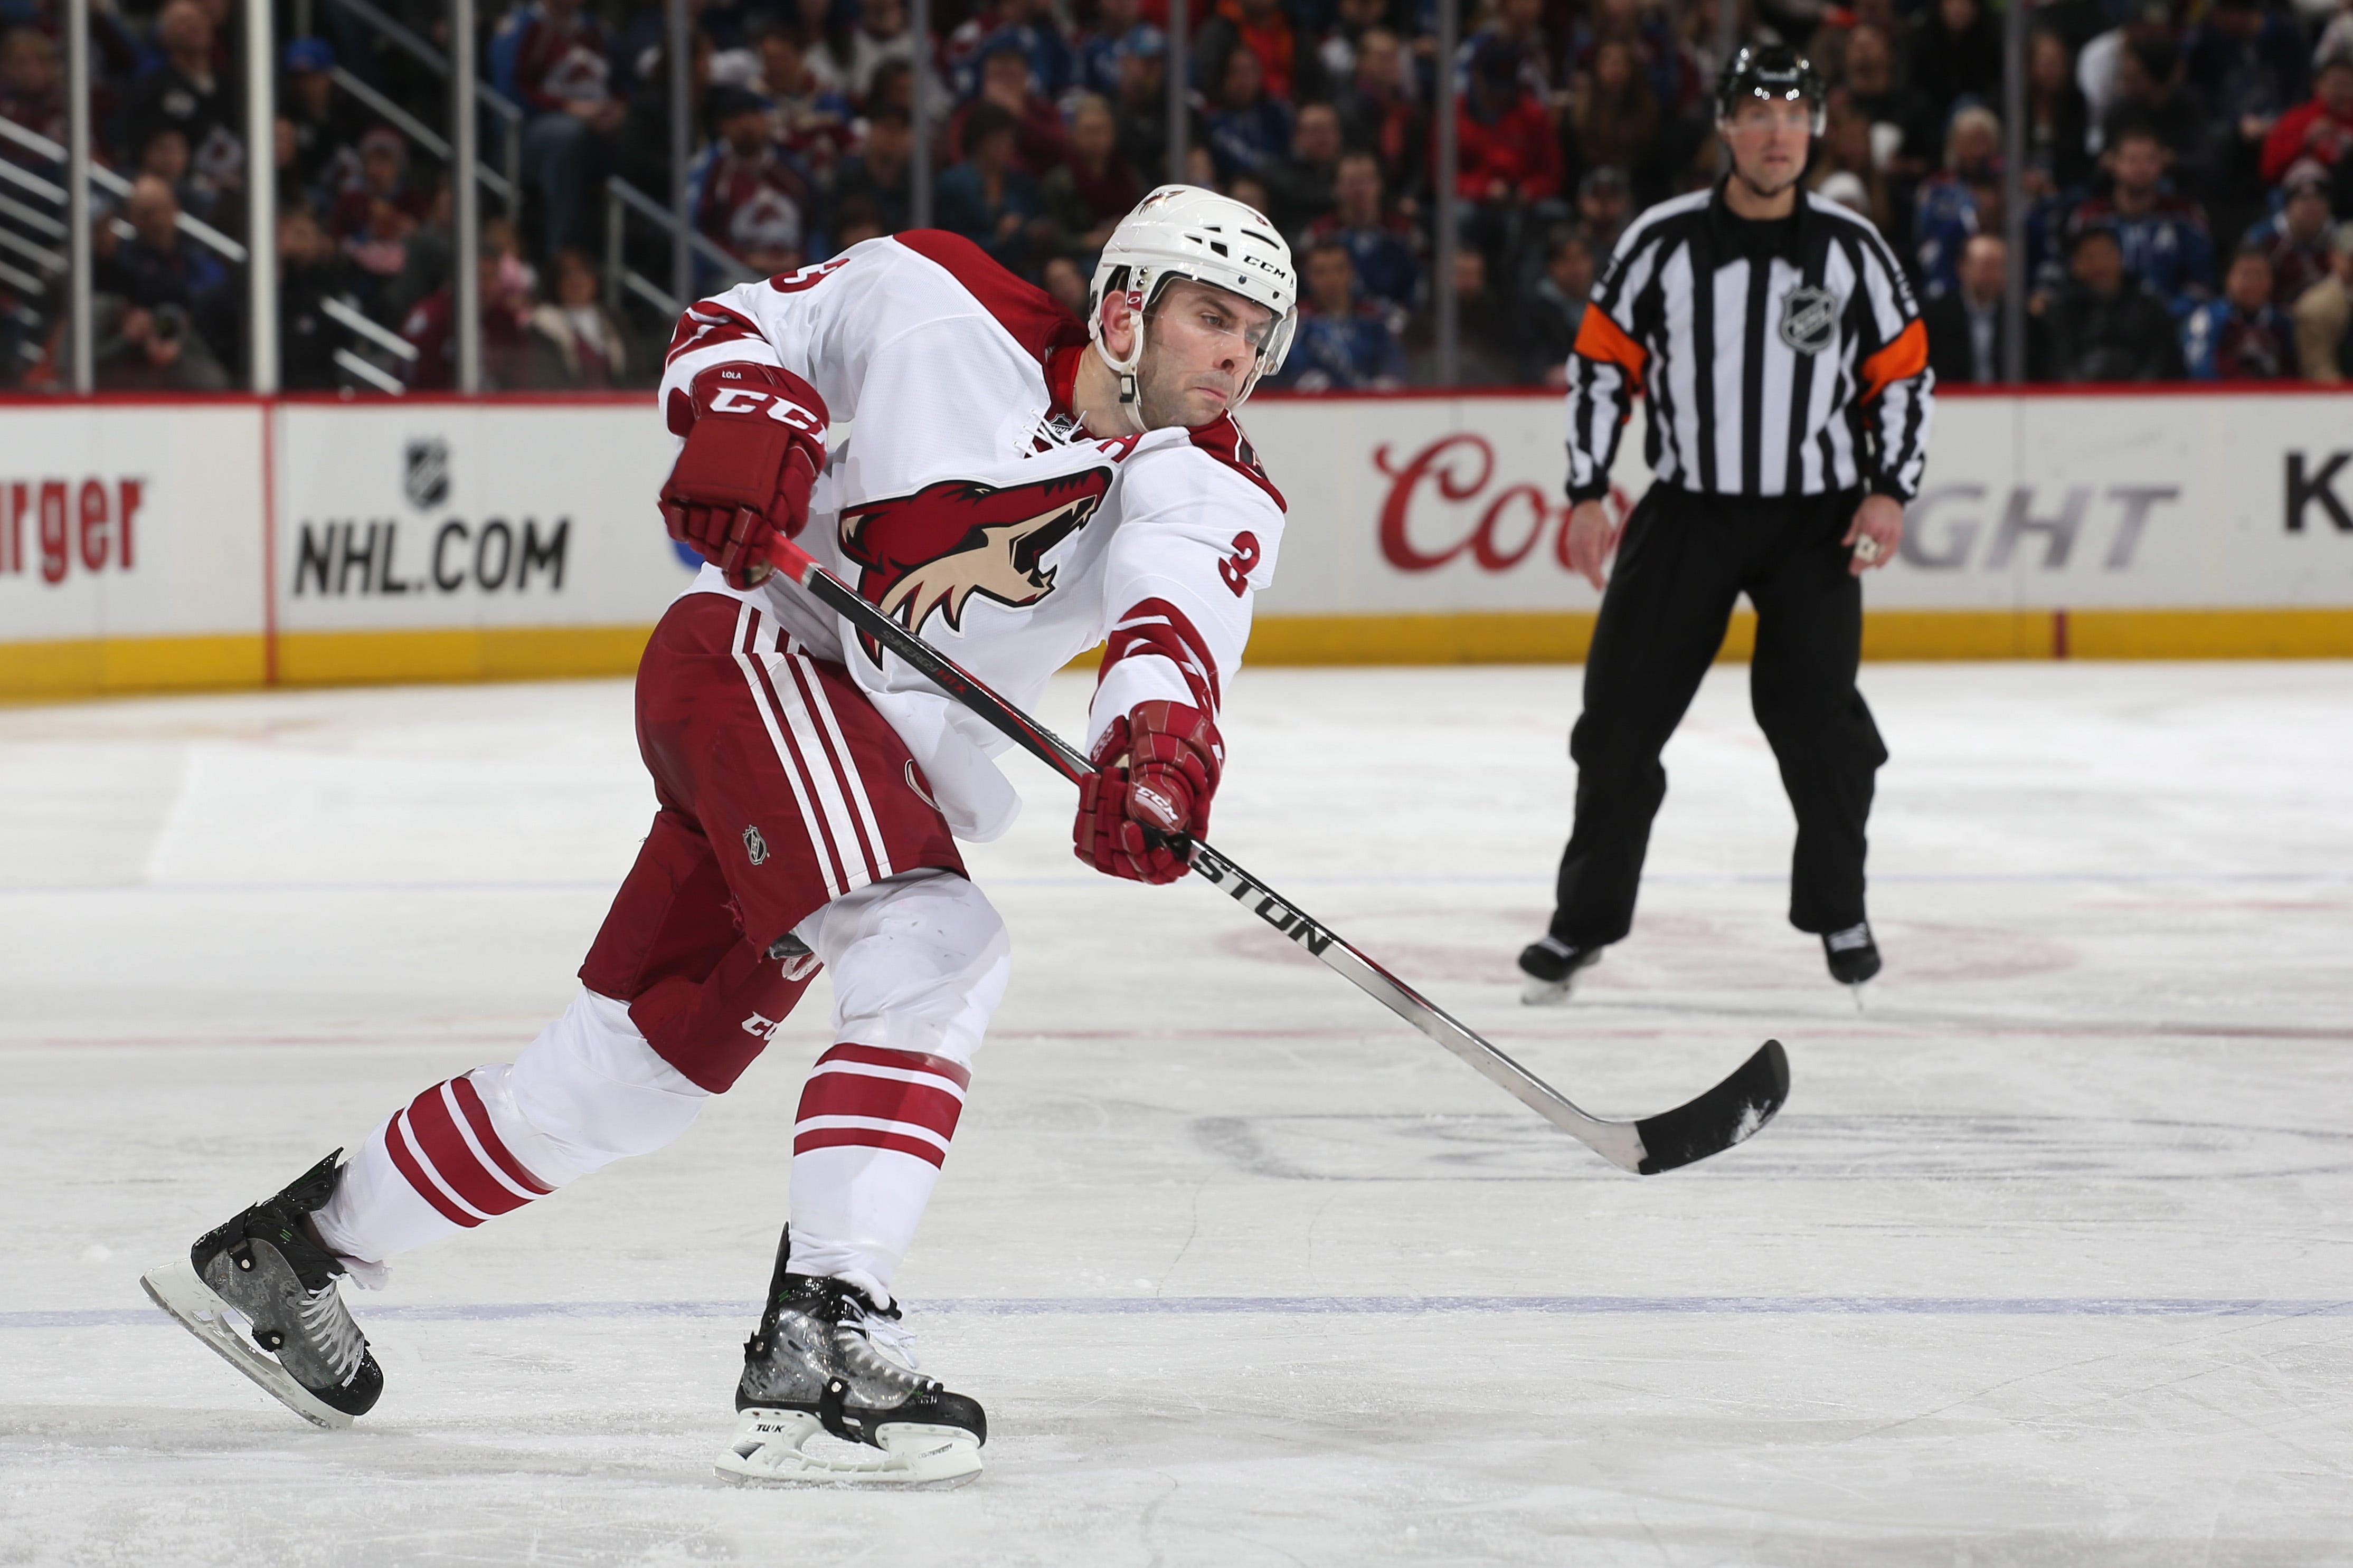 Arizona Coyotes D Oliver Ekman-Larsson: Career-High Points in 2015-16